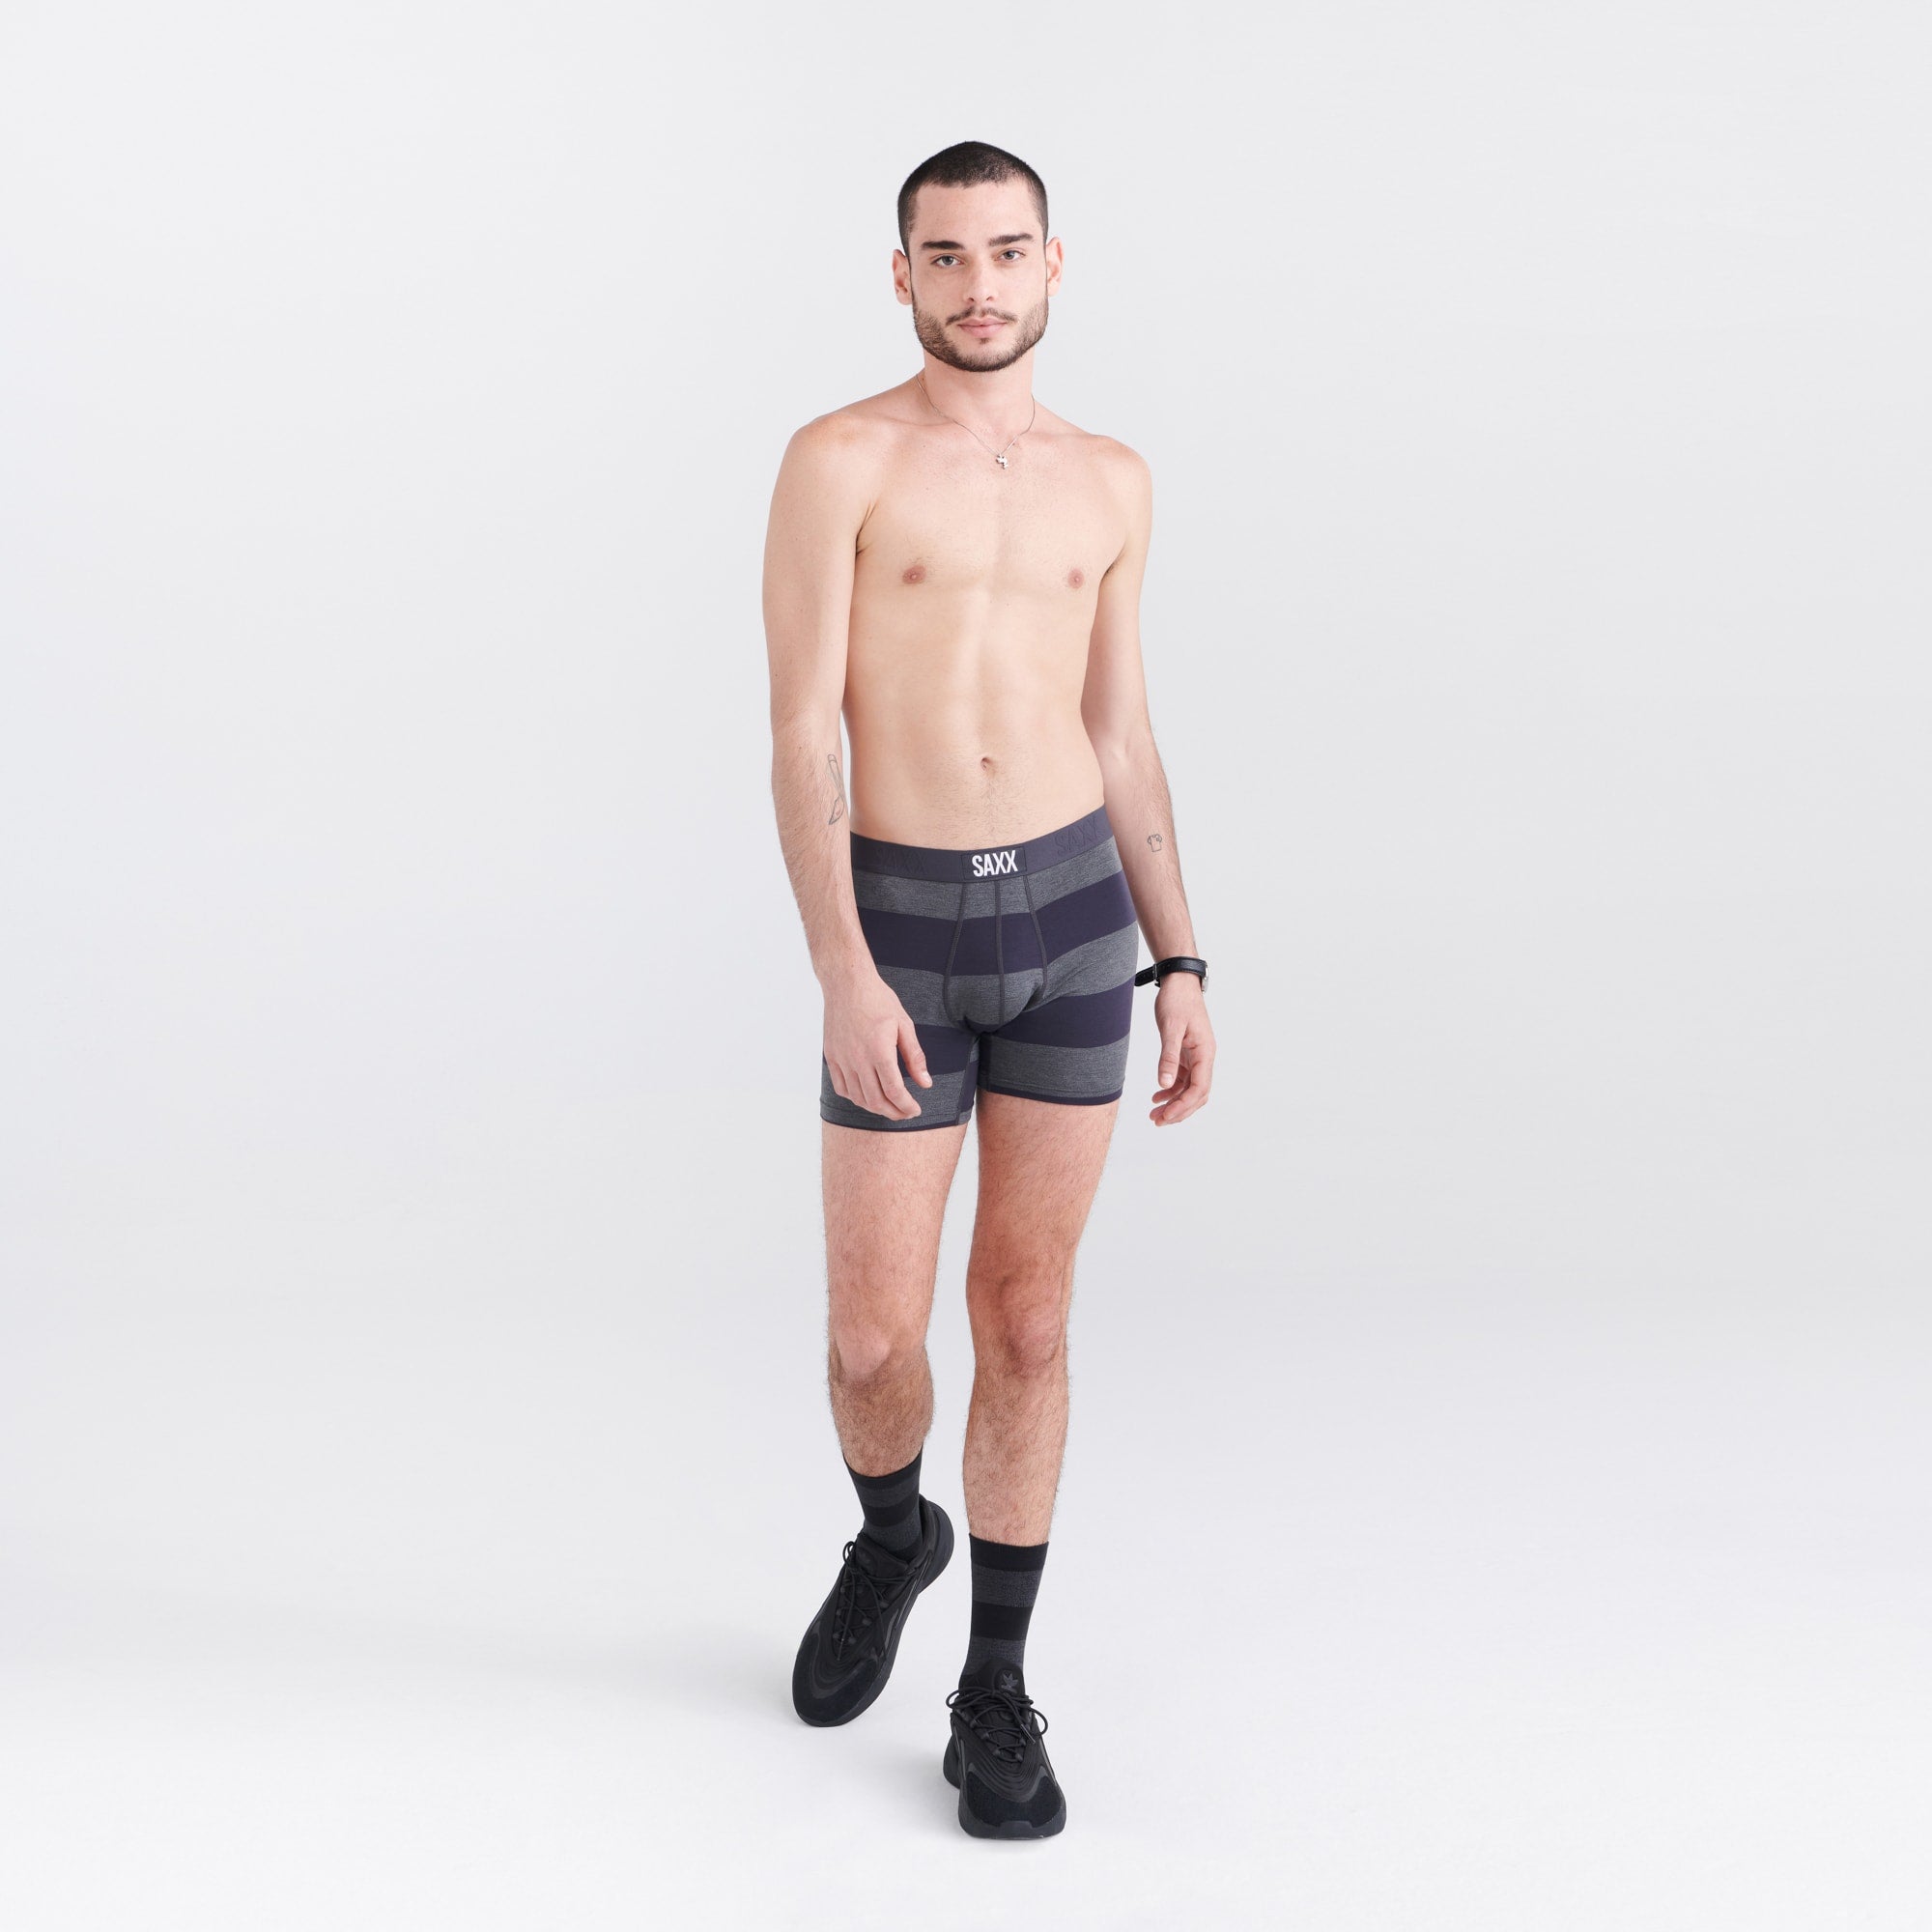 Pack de 2 boxers Vibe Graphite Ombre Rugby/Black